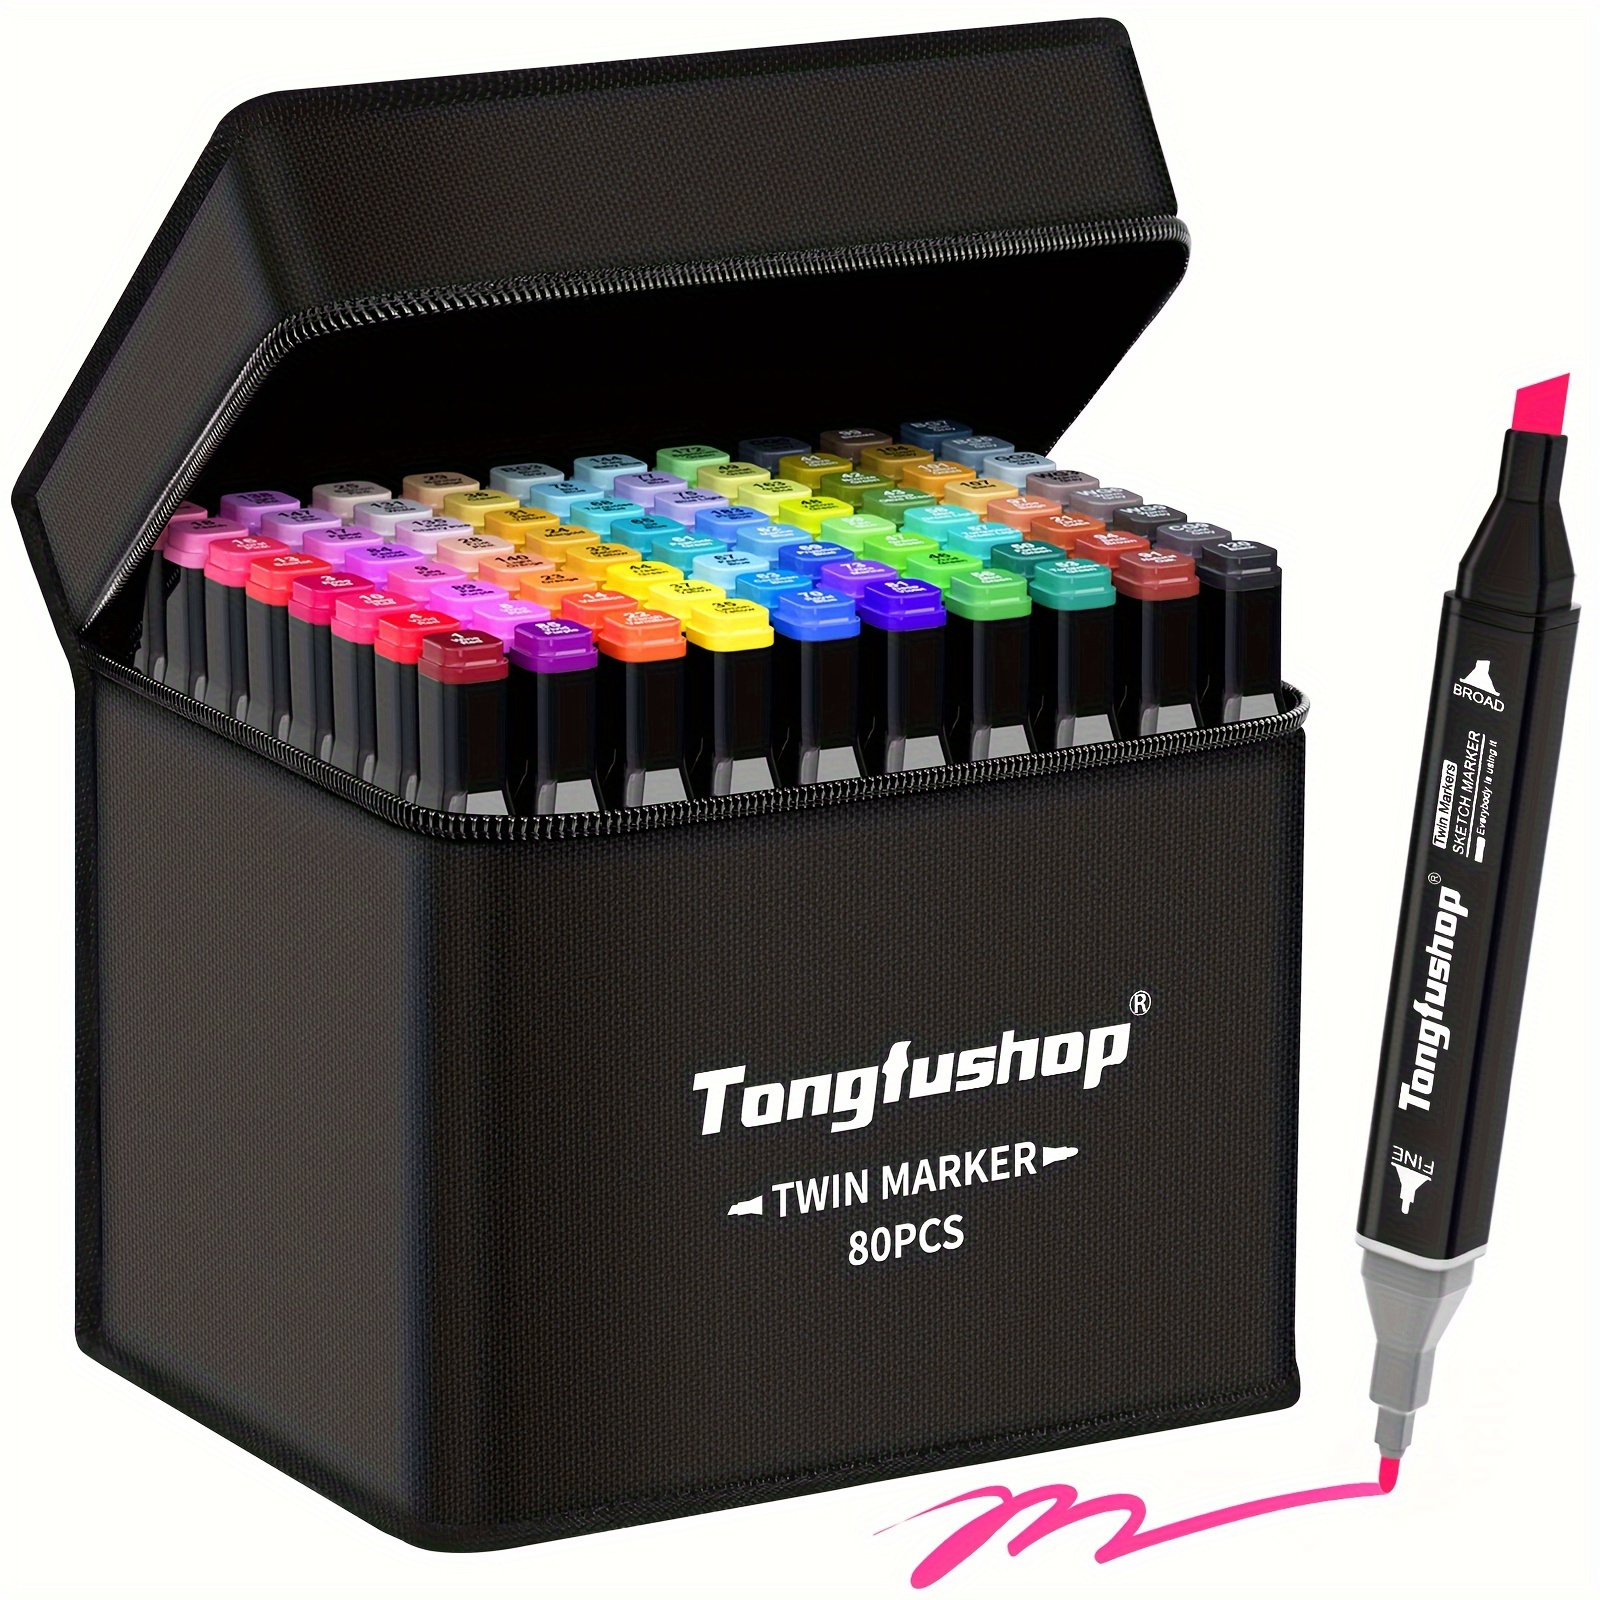 

Tongfushop Art Markers, 80 Colors Double Tipped Art Marker Set, Permanent Alcohol Based Sketch Pens For Artist Coloring Illustrations With Organizing Case, Pad